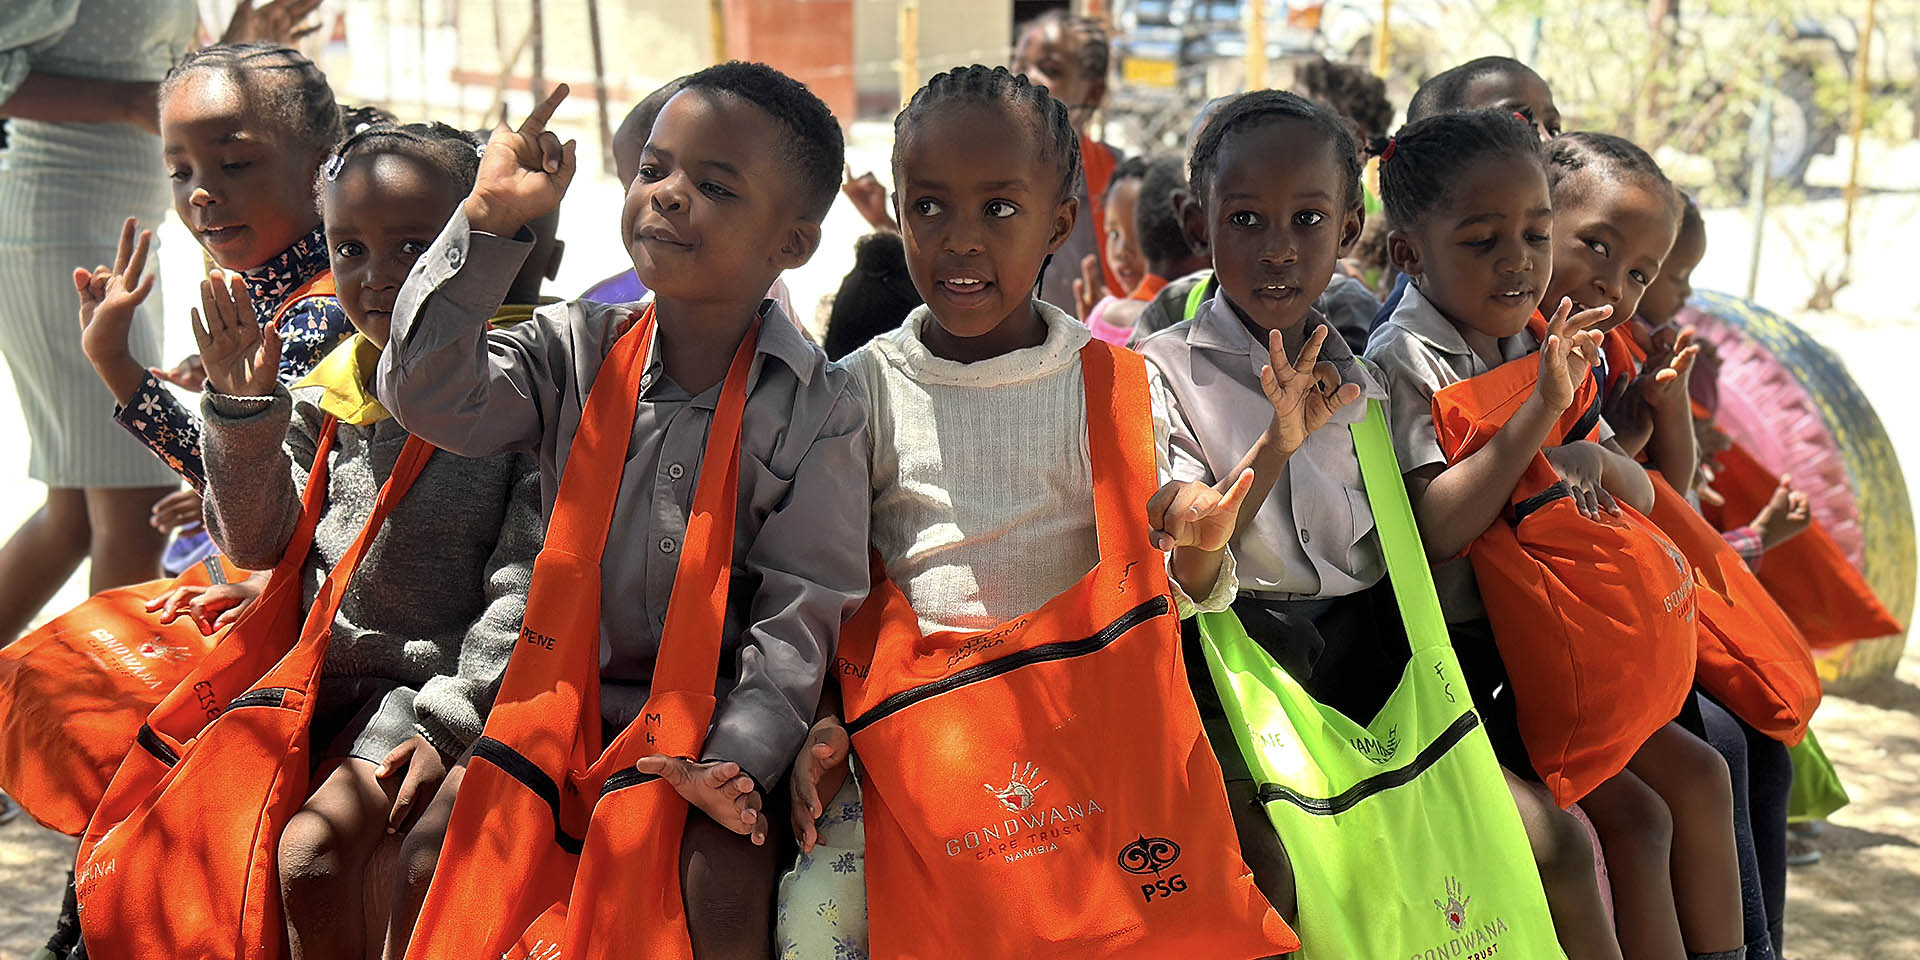 The Unspoken Love Behind Gondwana Care Trust's Back-to-School Christmas Bag Project